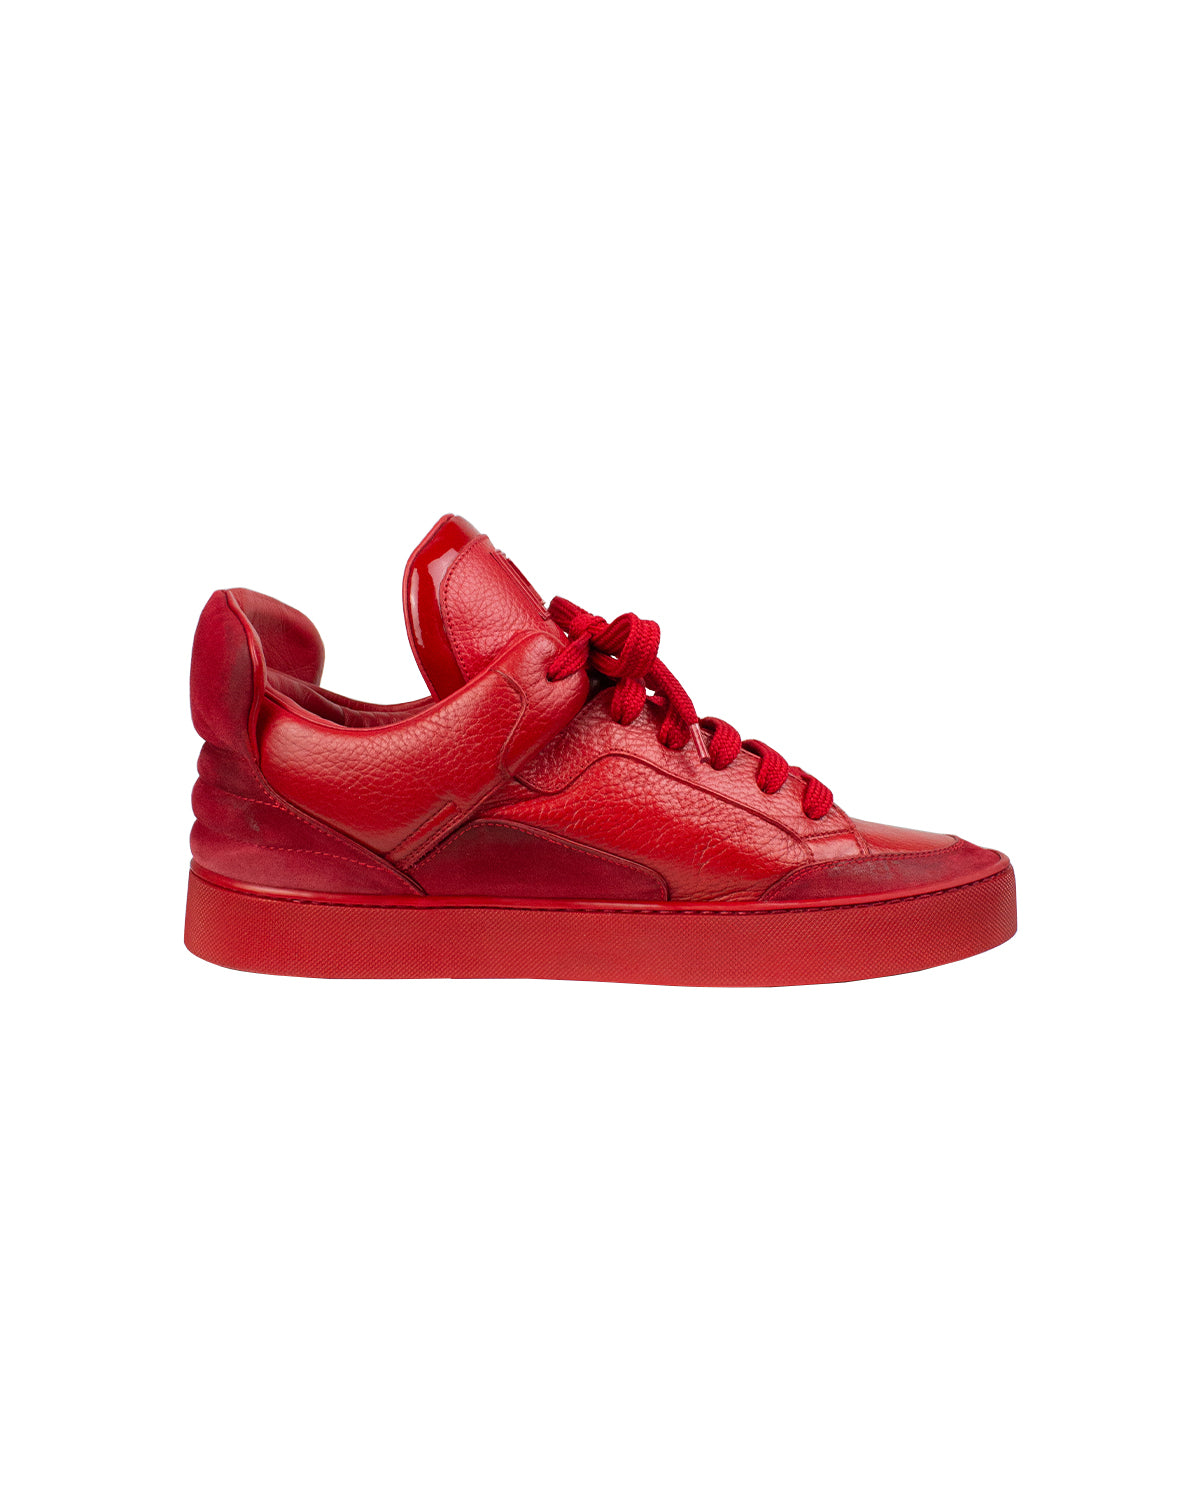 sneakers louis vuitton kanye west